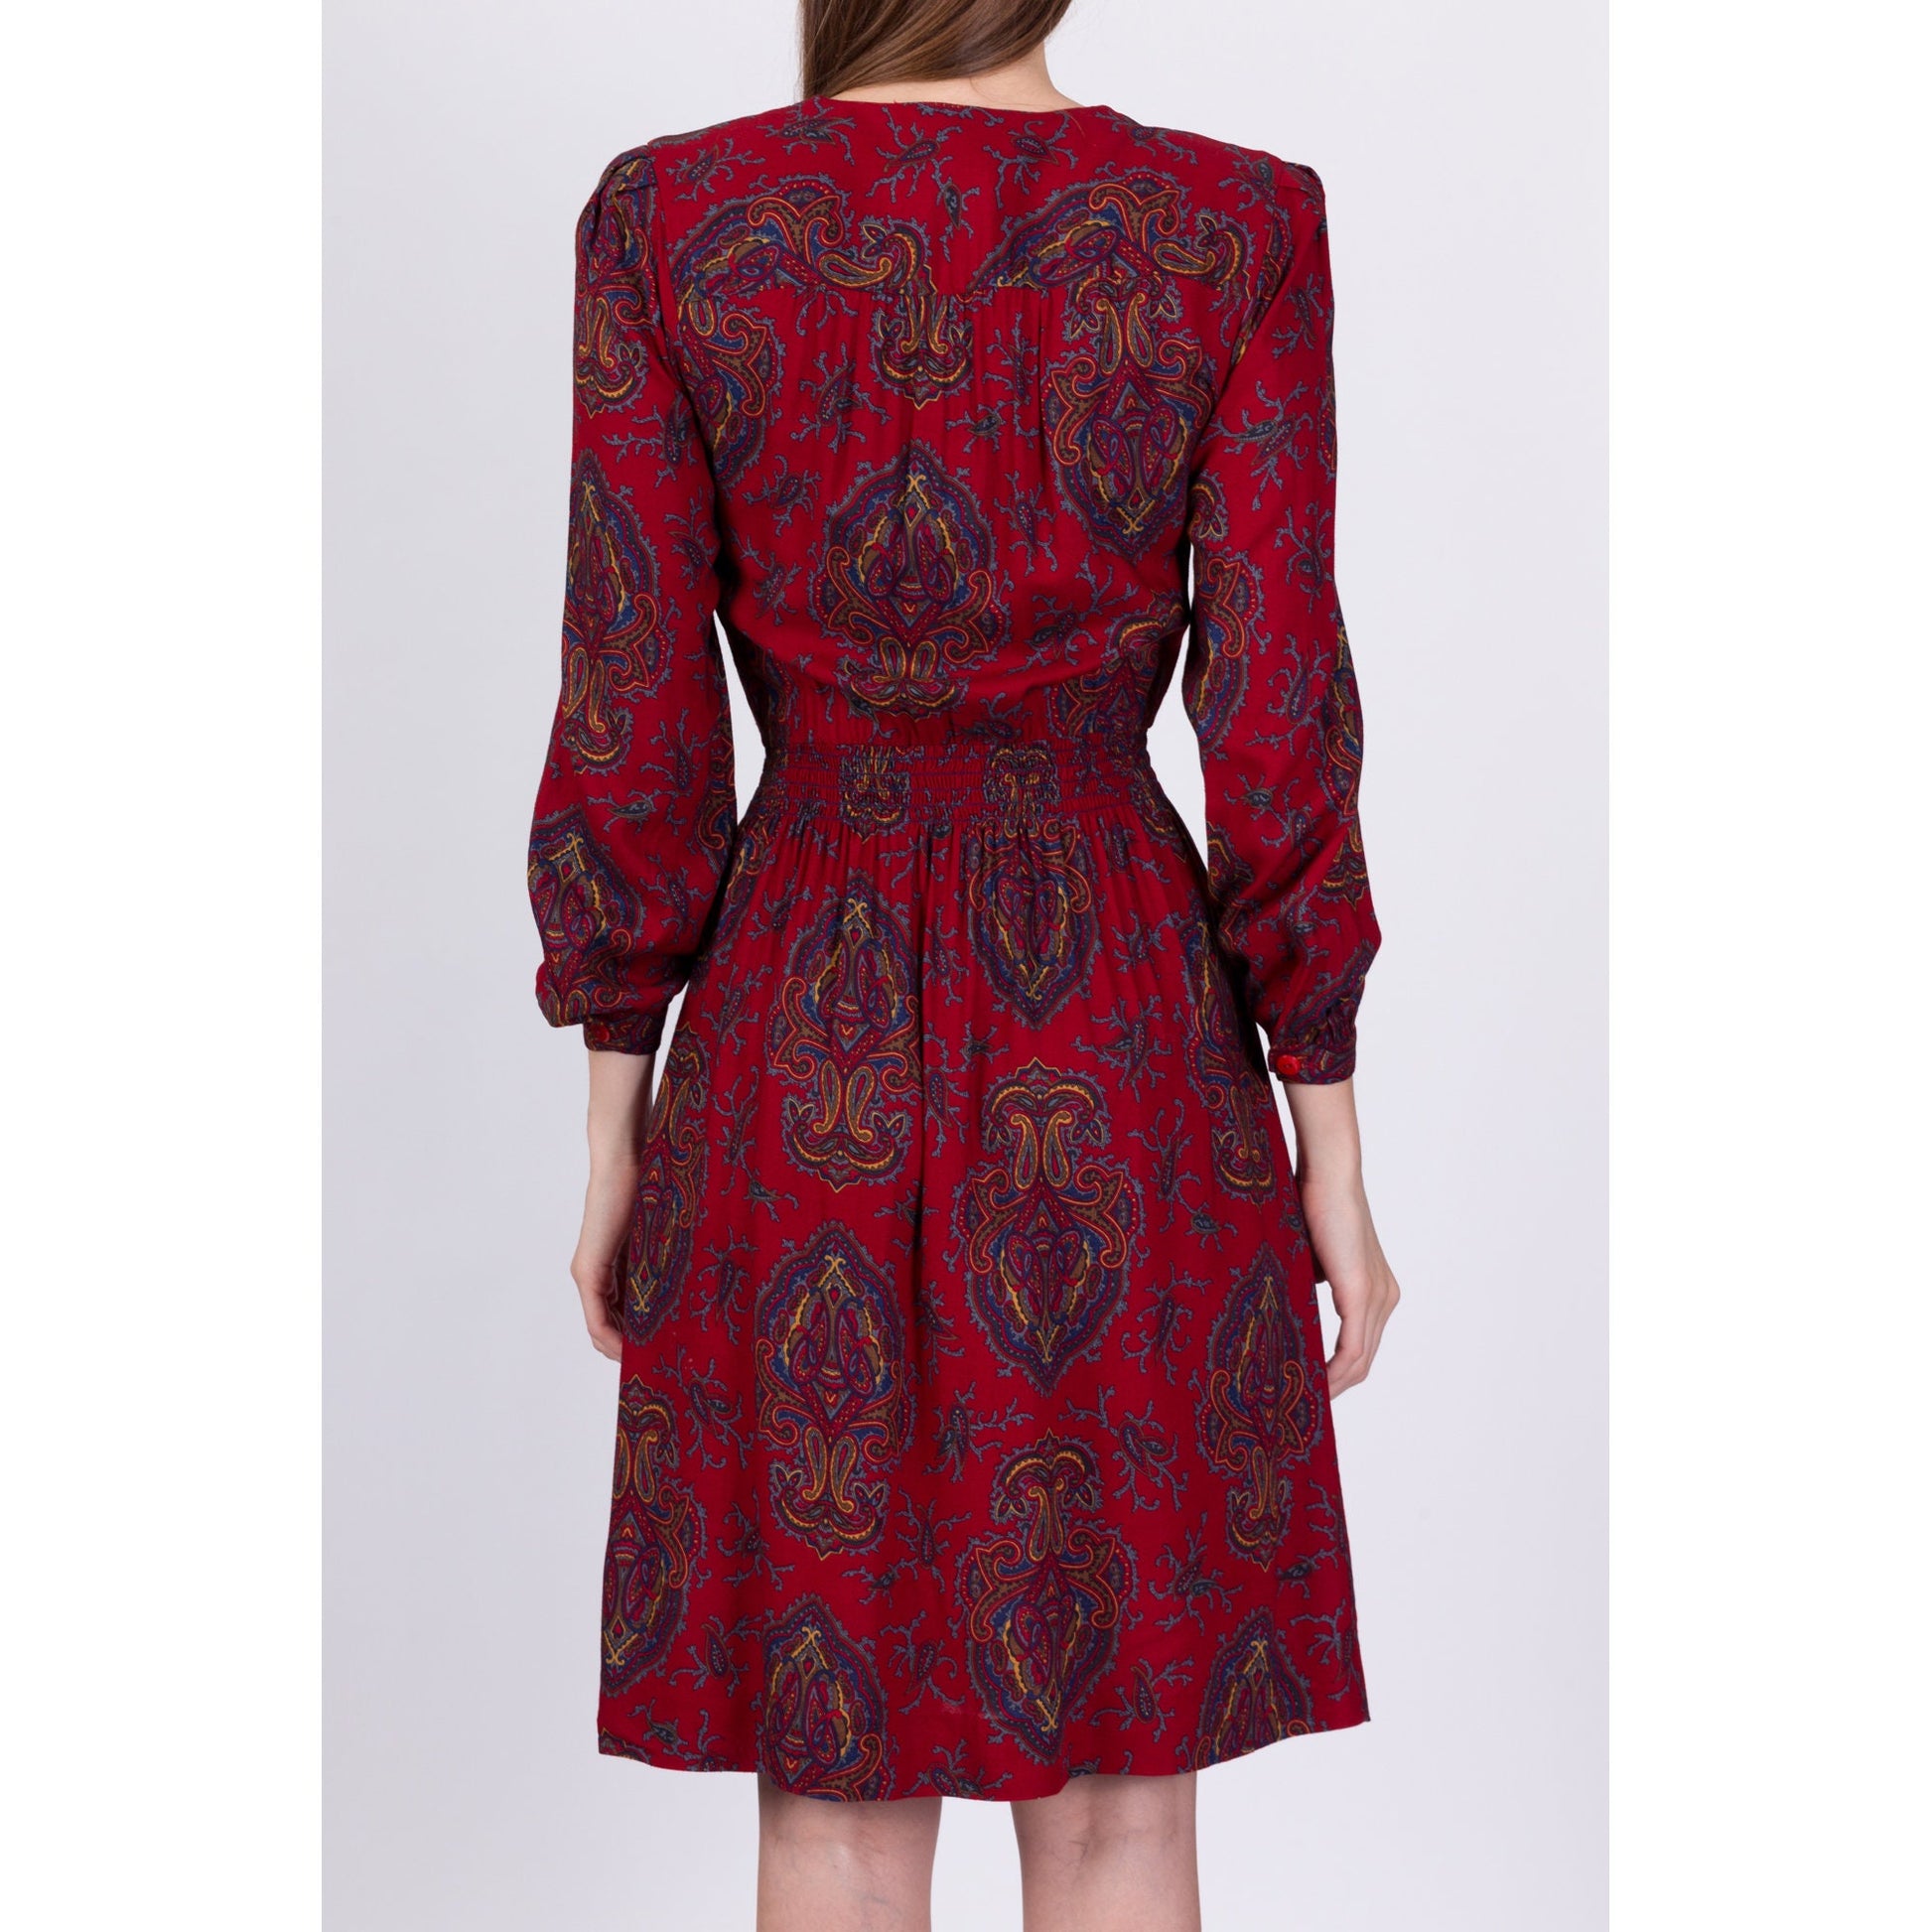 80s Grunge Red Paisley Dress - Extra Small 